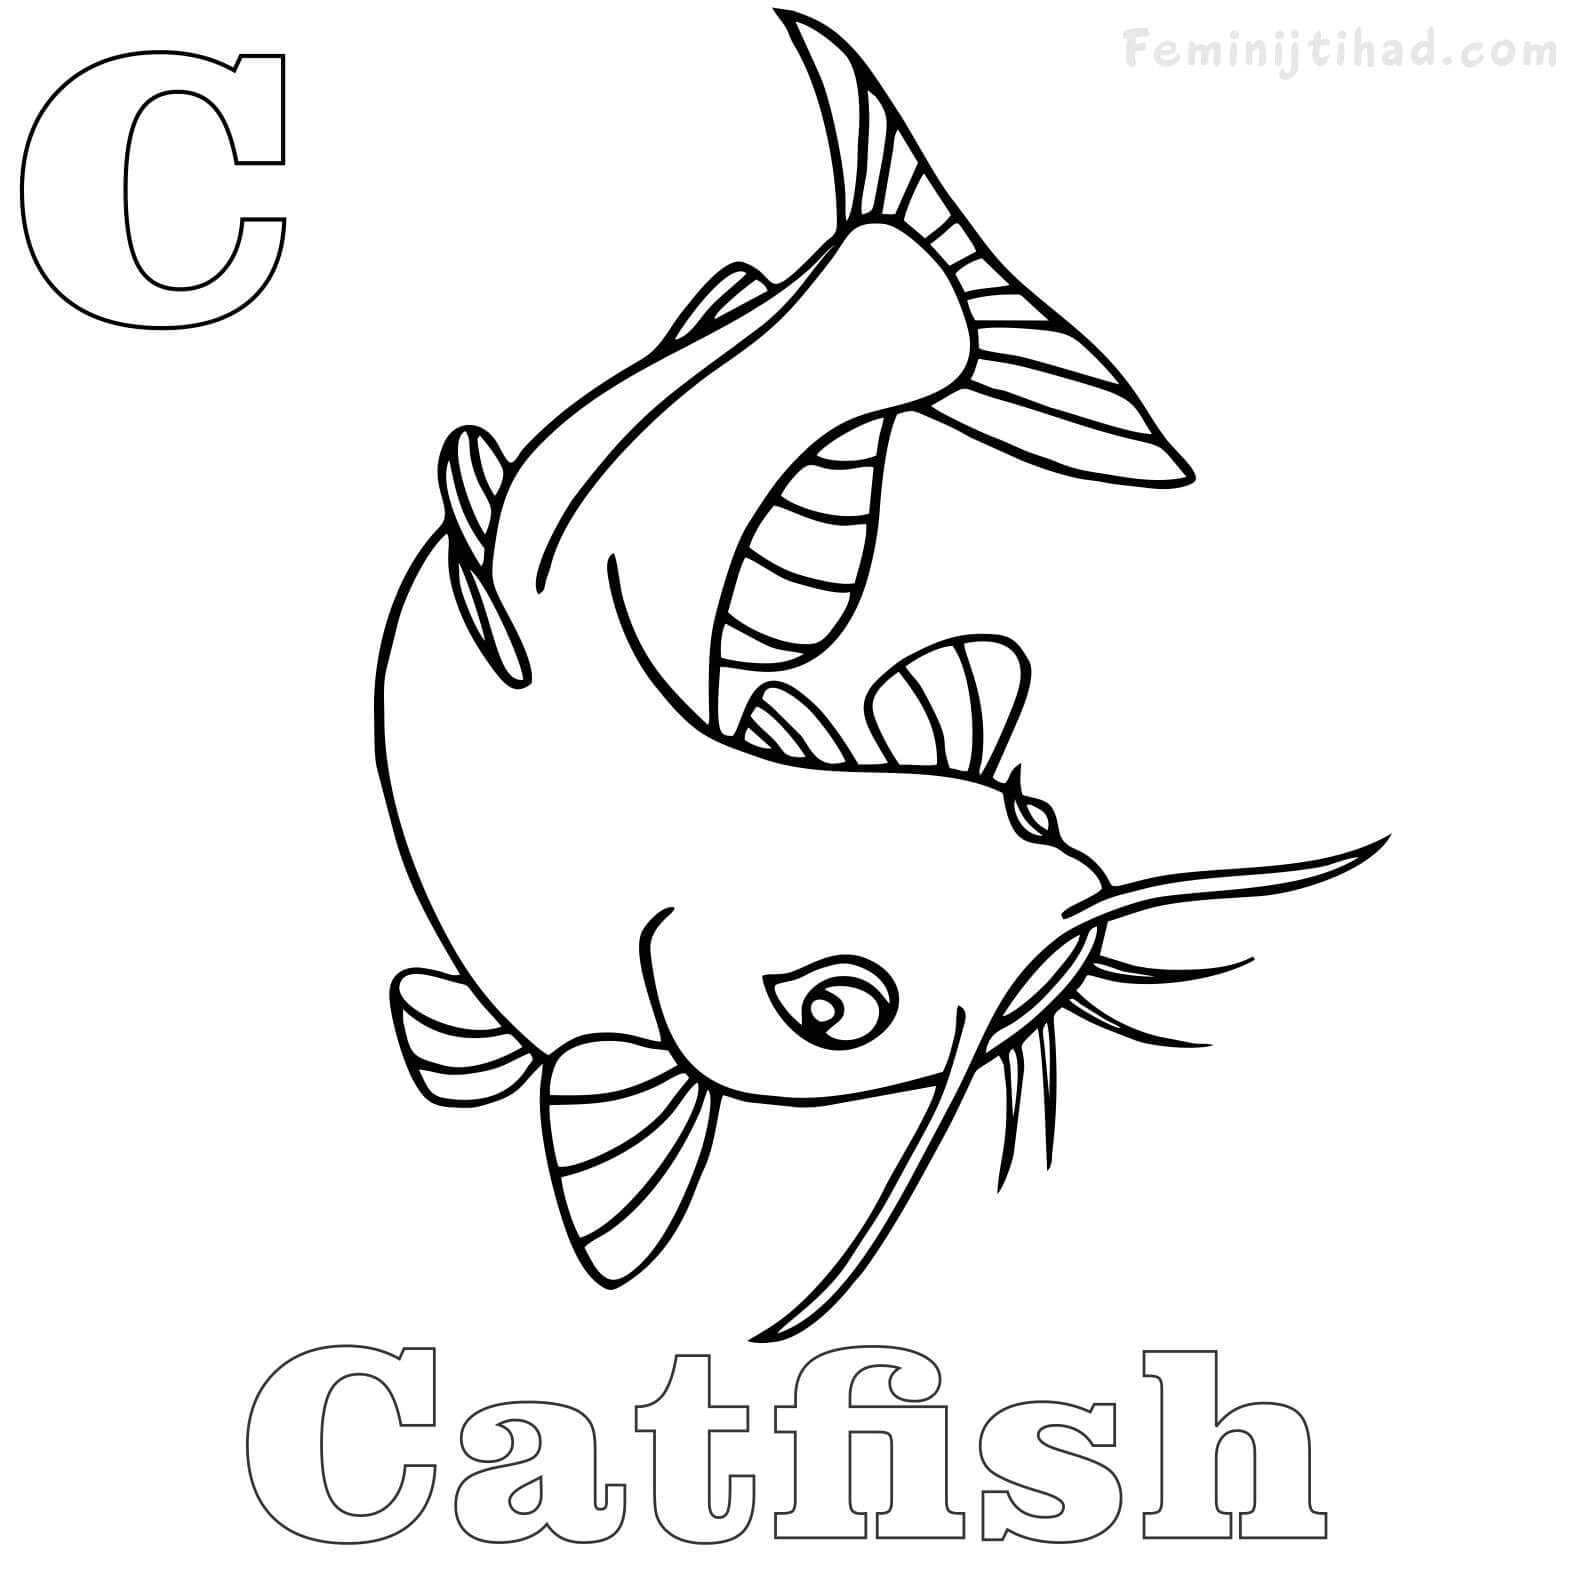 catfish coloring book pages